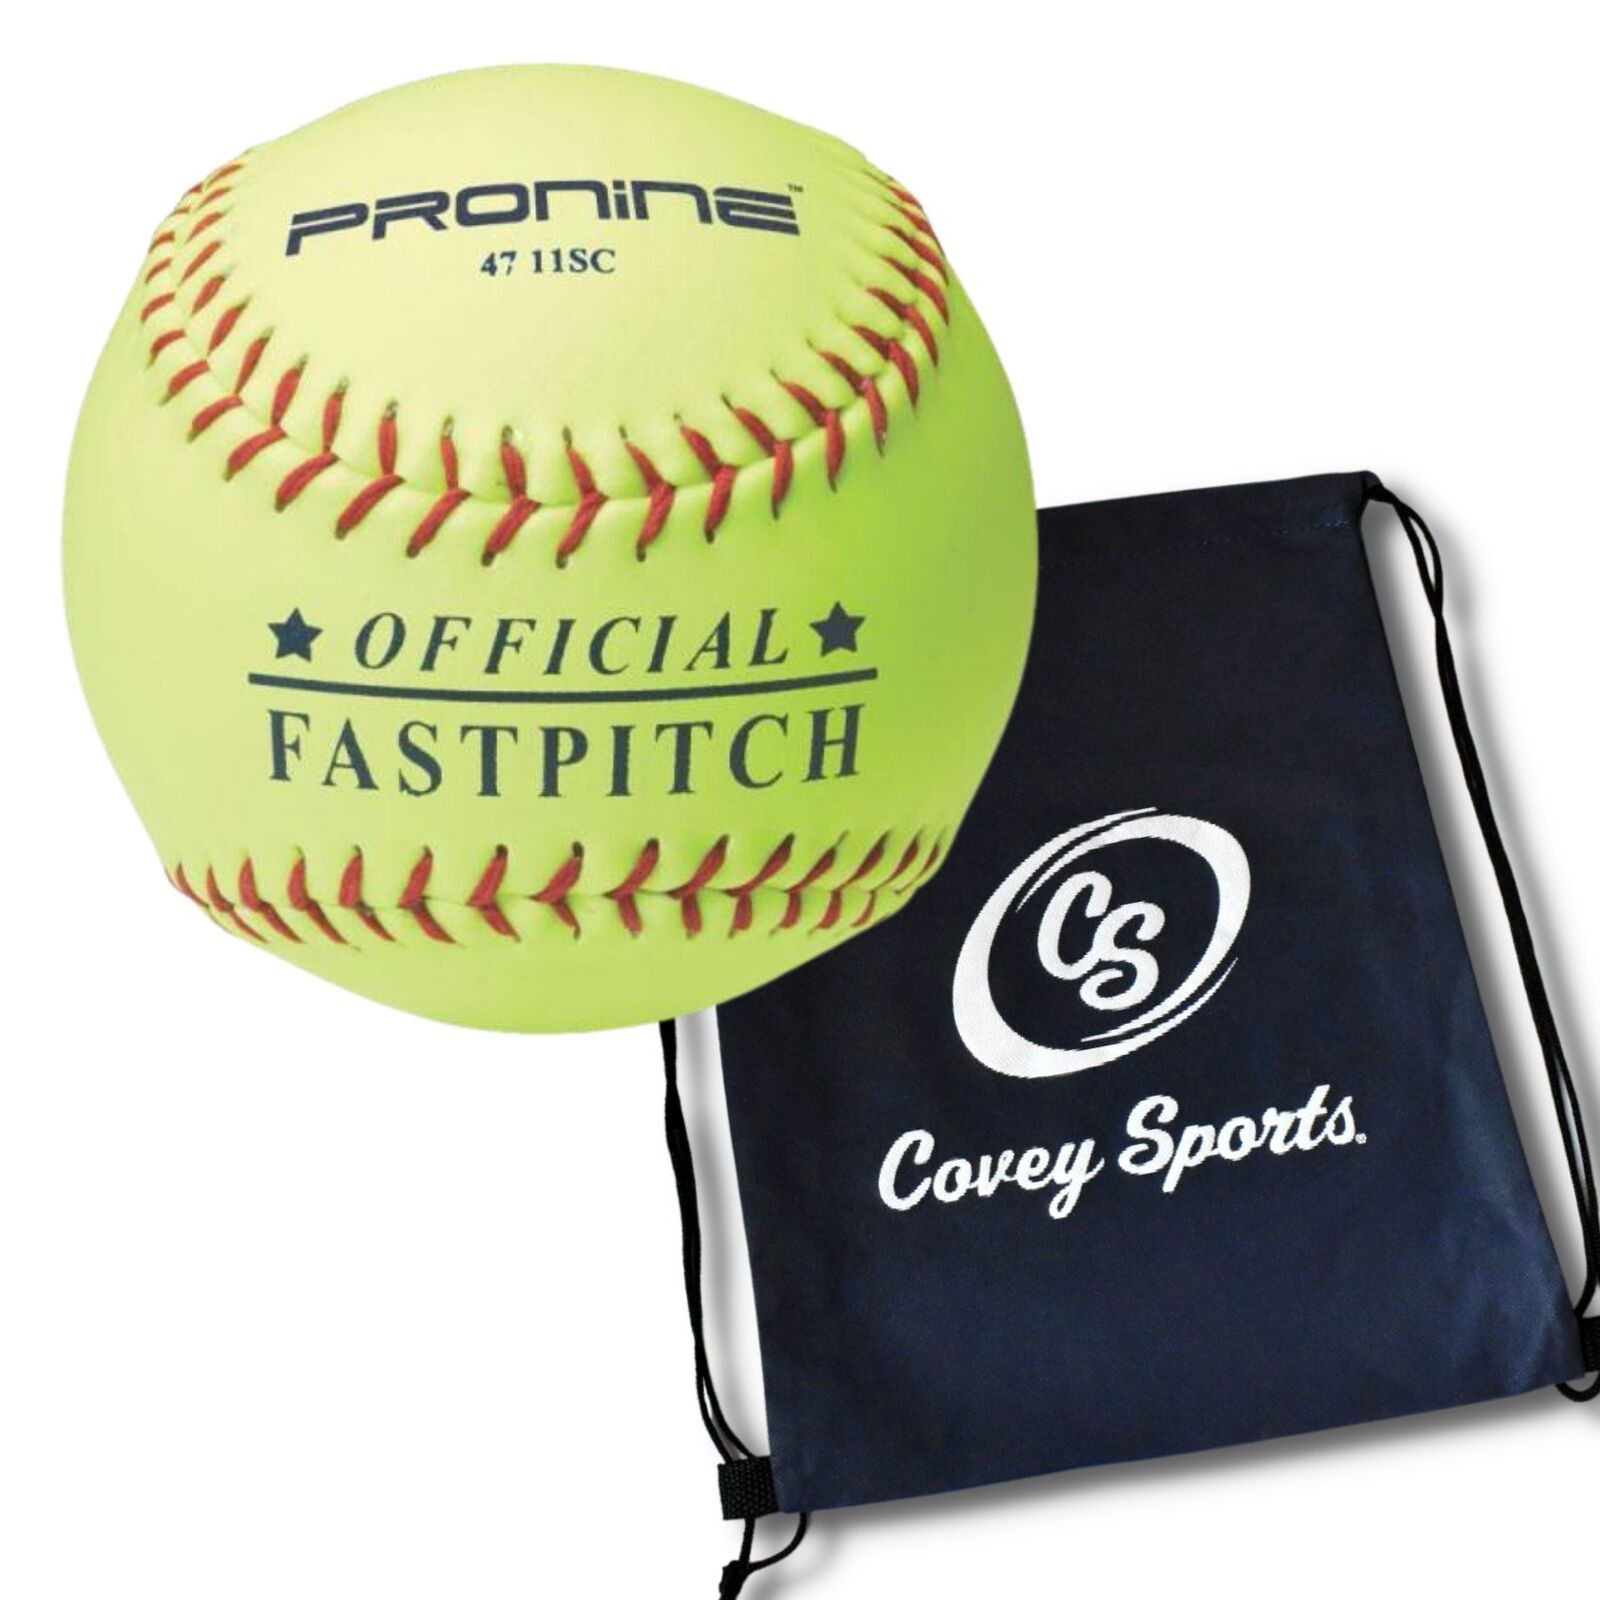 Pronine 11-inch Fastpitch Softballs For 10u Girls & Covey Bag (official Fp)